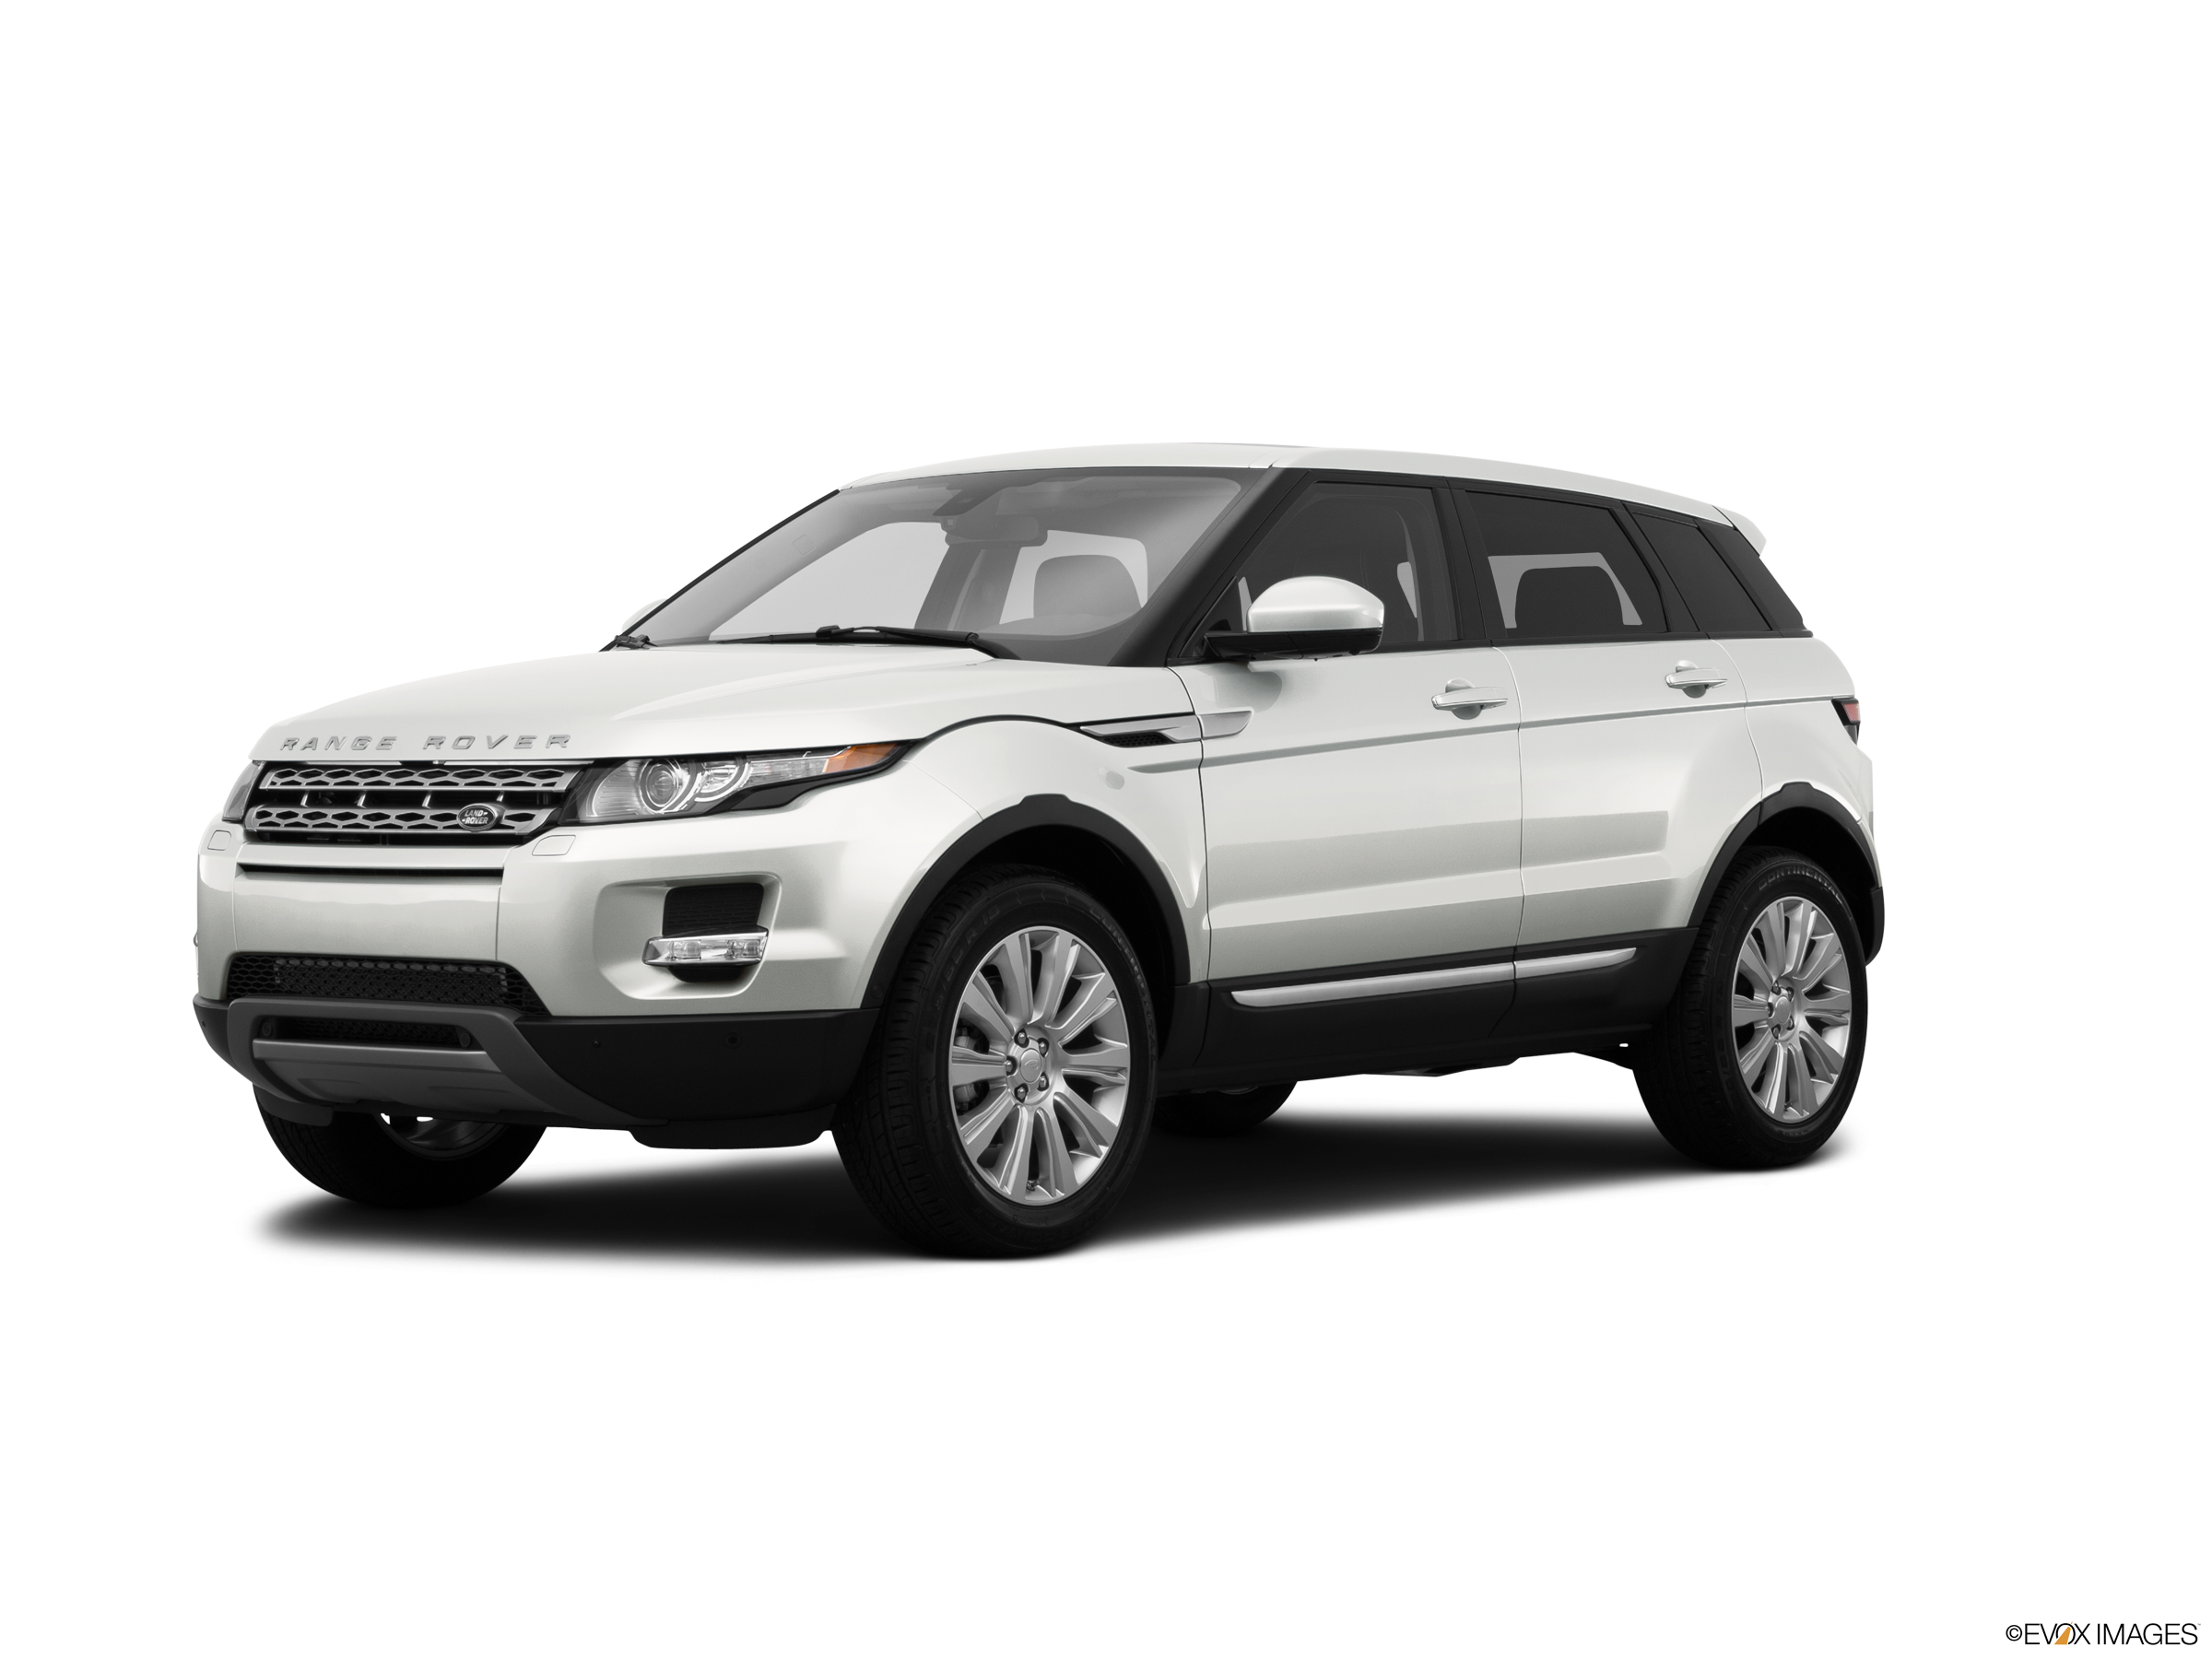 leg uit Giet Mammoet Used 2014 Land Rover Range Rover Evoque Pure Sport Utility 4D Prices |  Kelley Blue Book